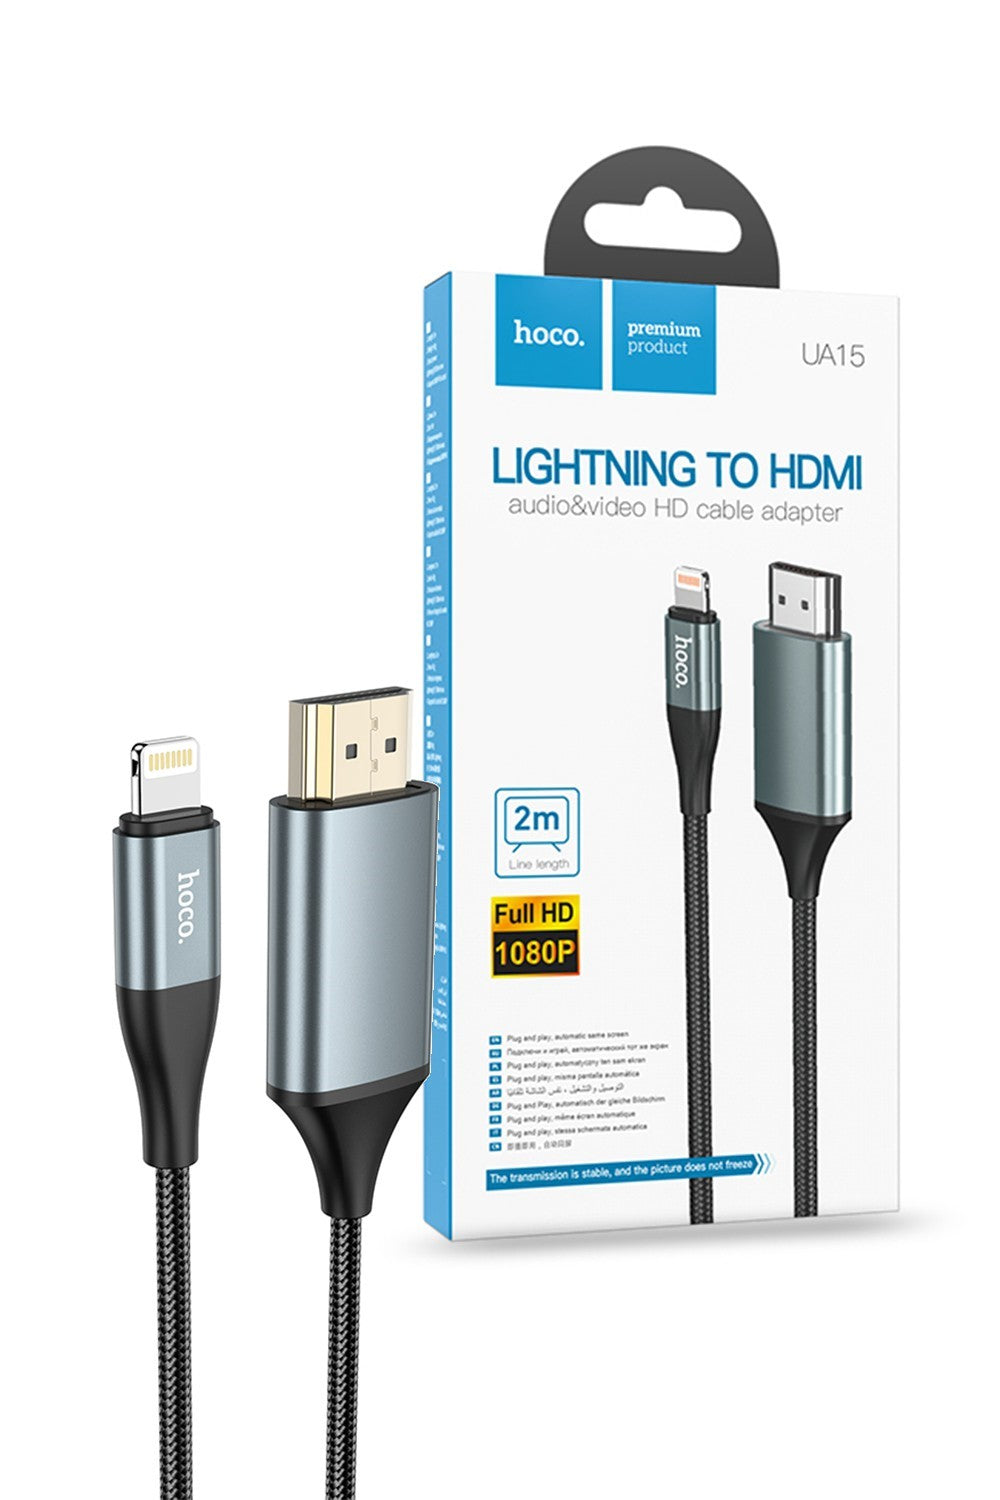 Hoco Lightning to 4K HDMI Cable 2m for iPhone iPad UA15